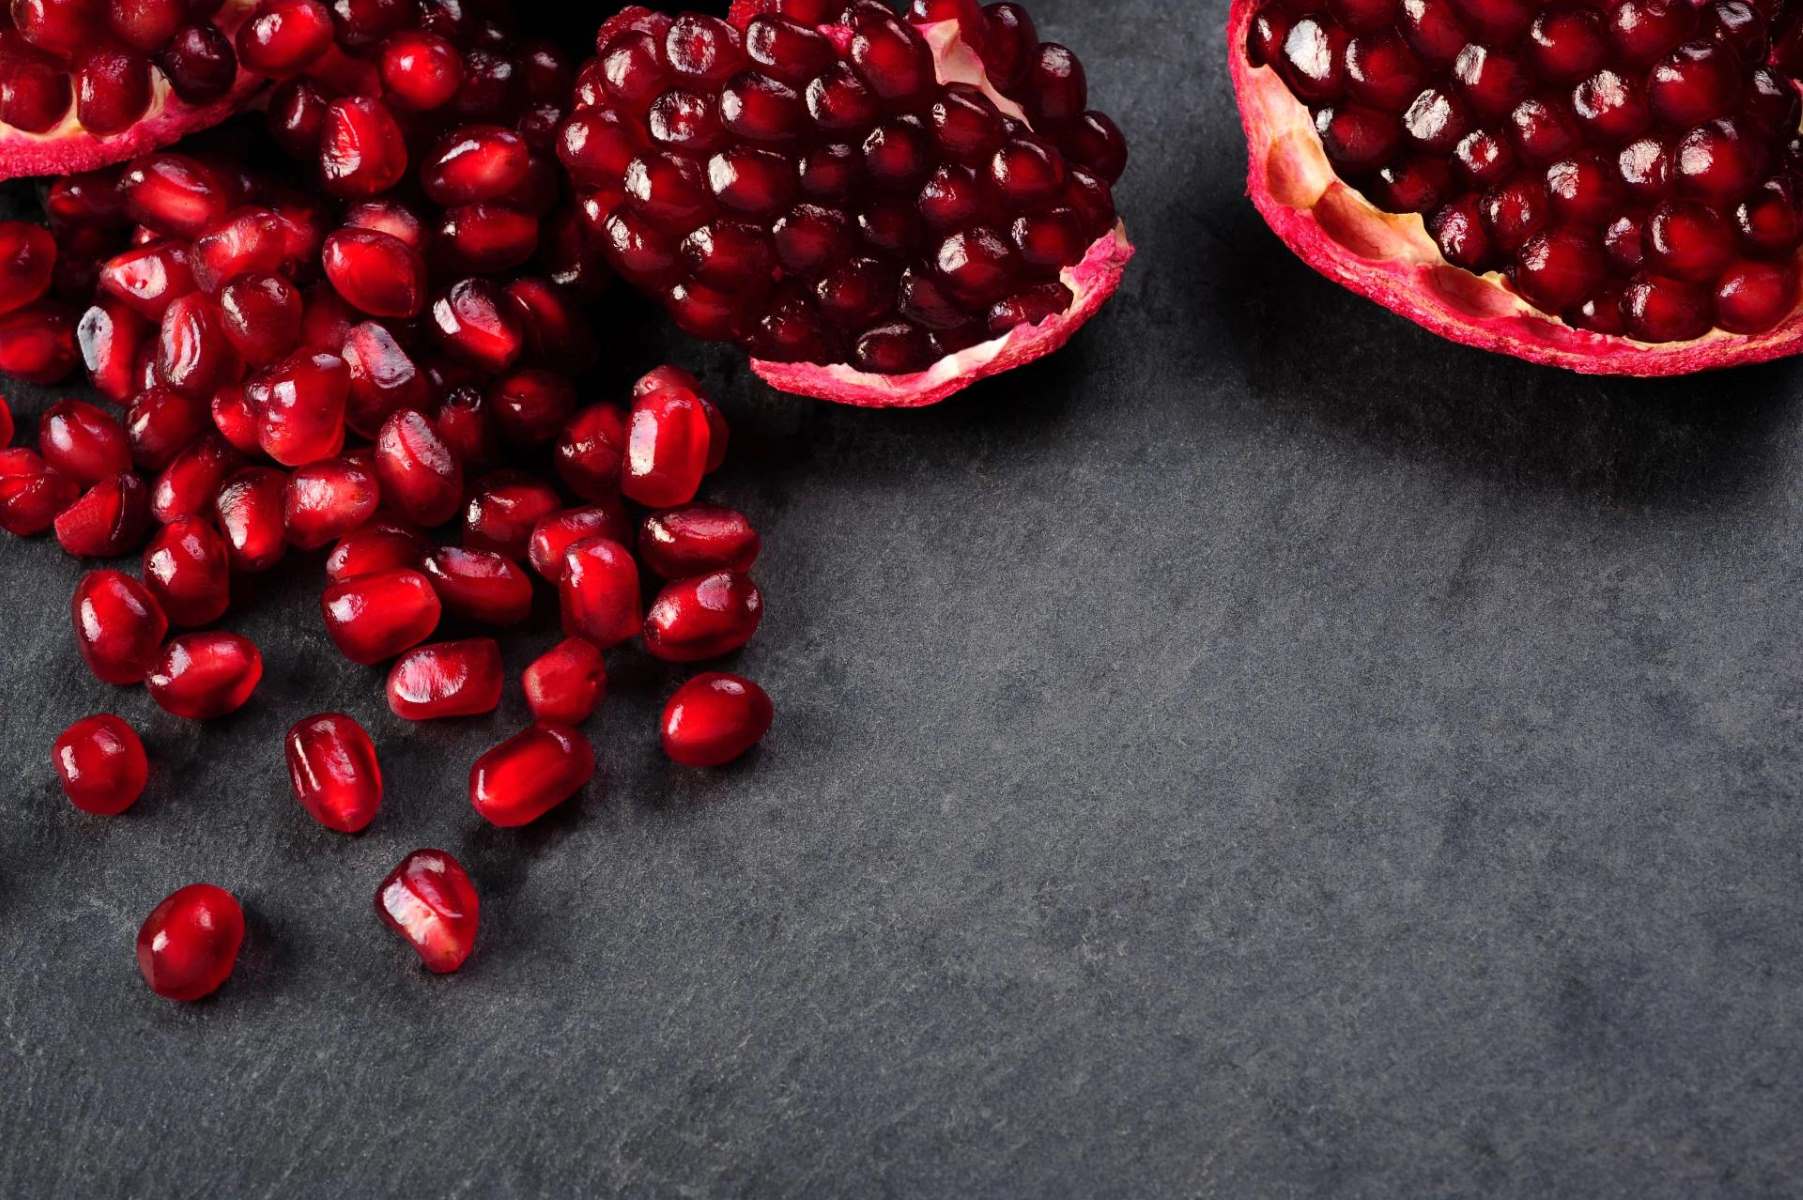 How Many Calories Are In Pomegranate Seeds